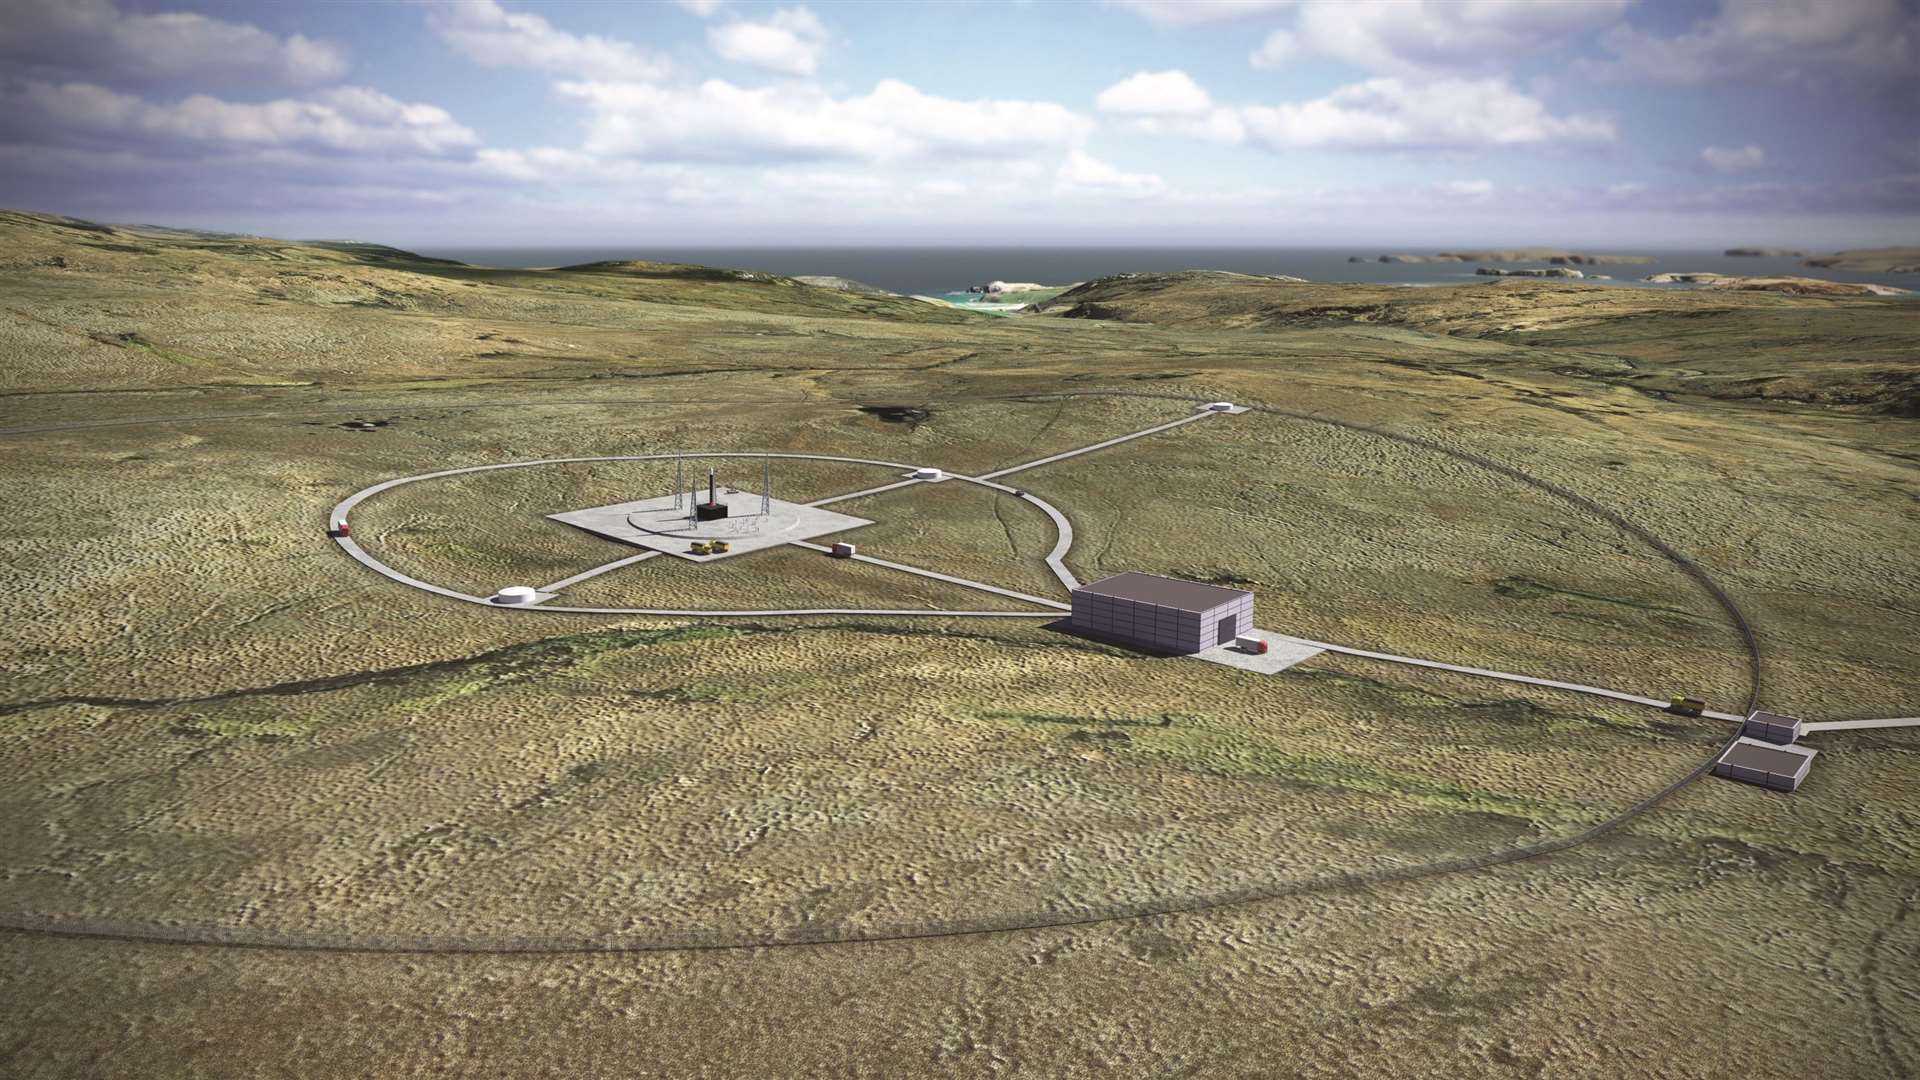 Scotland is already home to a fifth of the UK's space sector jobs and with plans for launch sites in Sutherland, Moray and Shetland, this could grow even further.